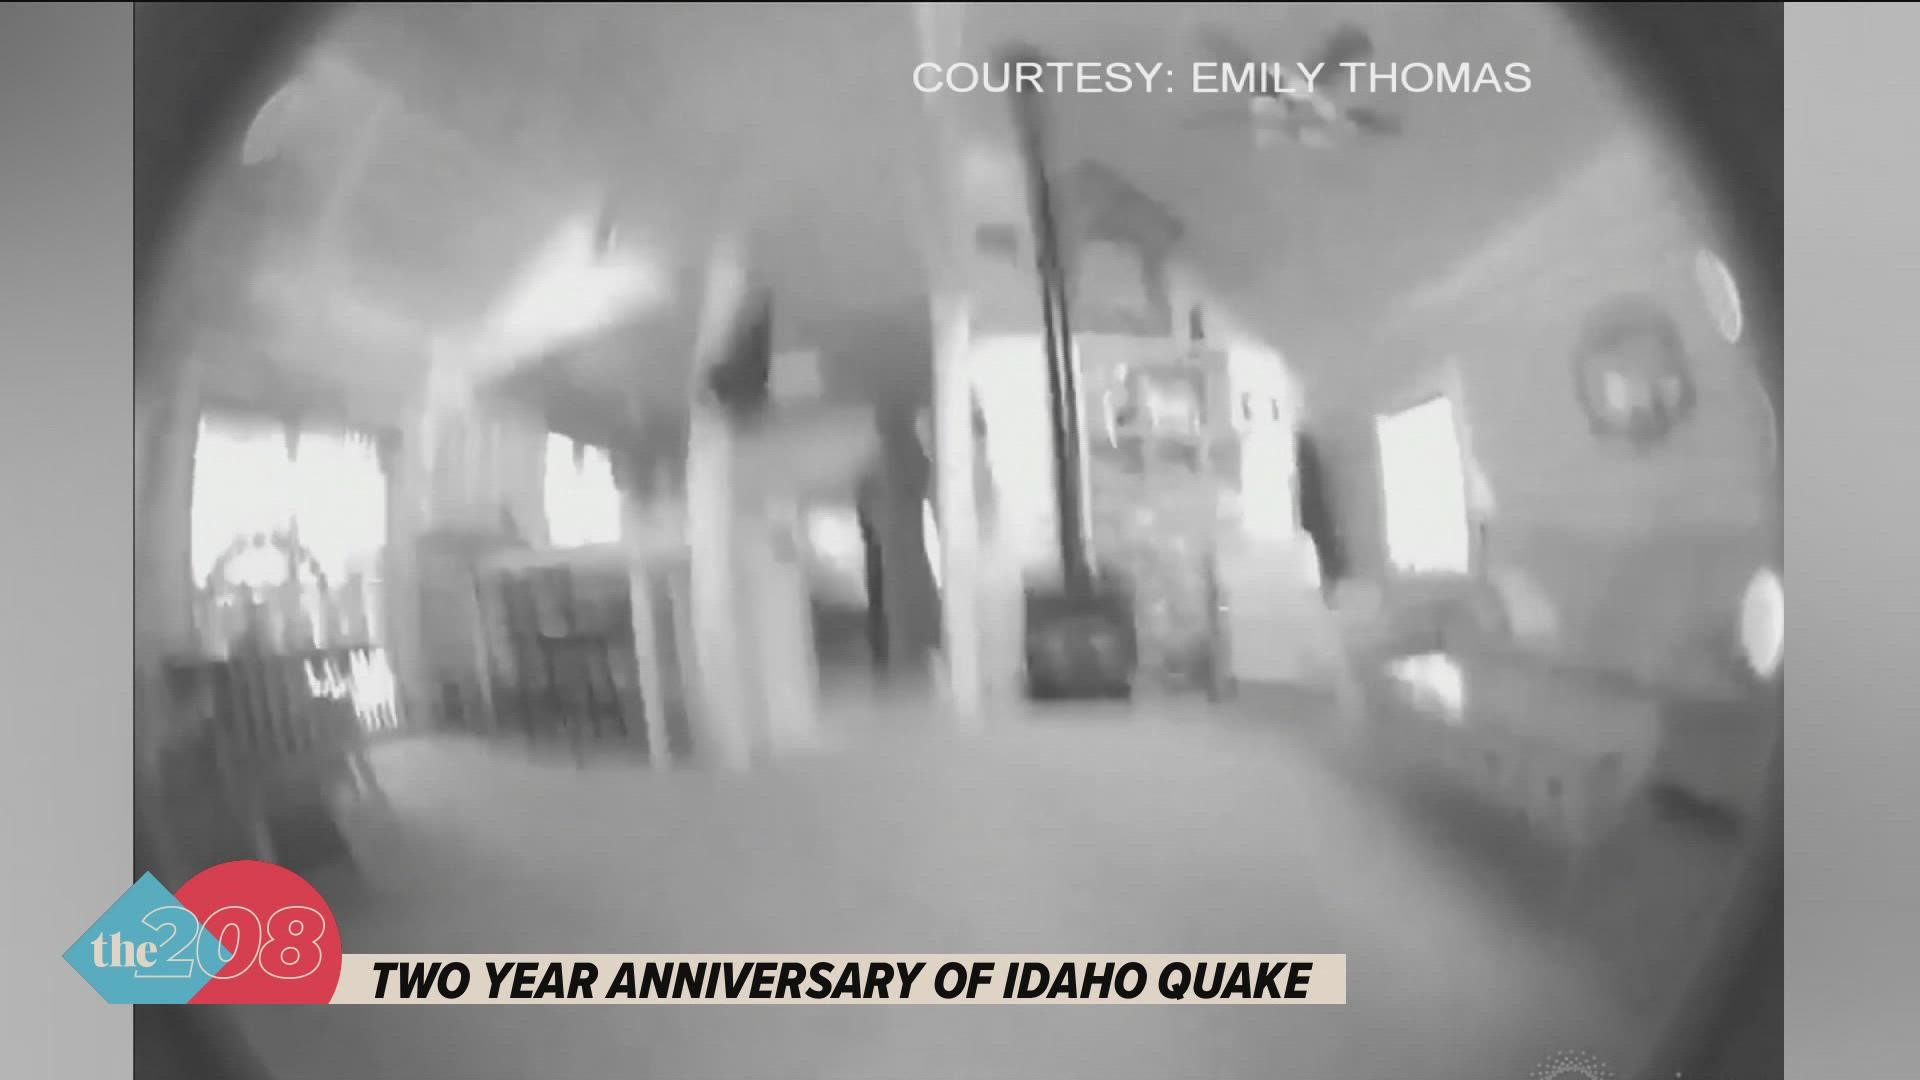 The March 31, 2020 event was the strongest earthquake in almost 40 years and the second-largest ever recorded earthquake in Idaho.